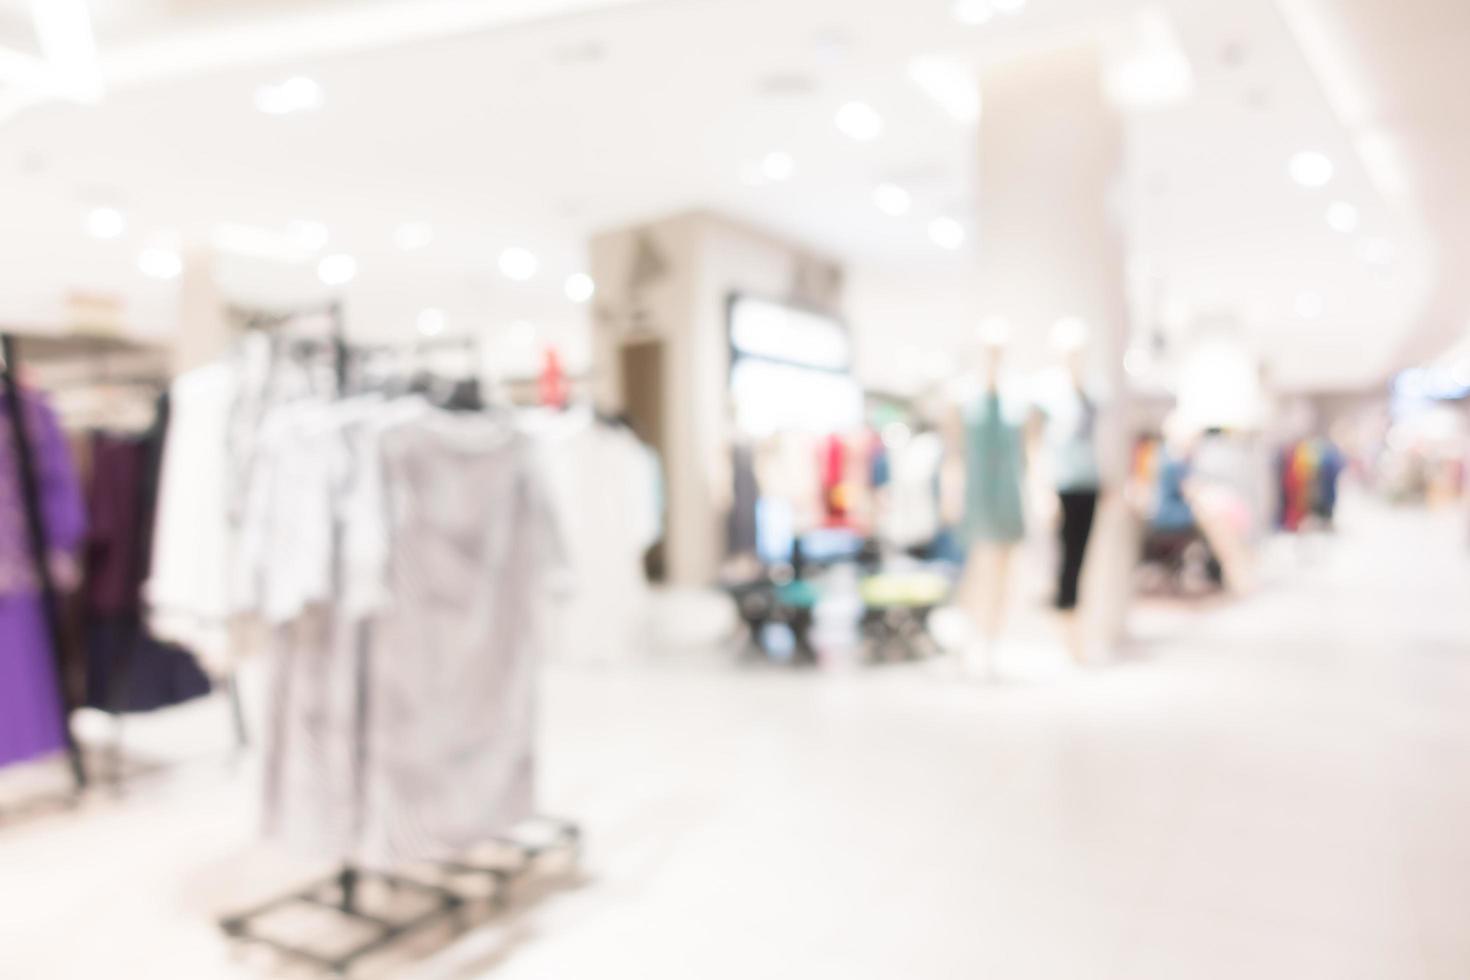 Blurred shopping mall and retail store interior for background photo